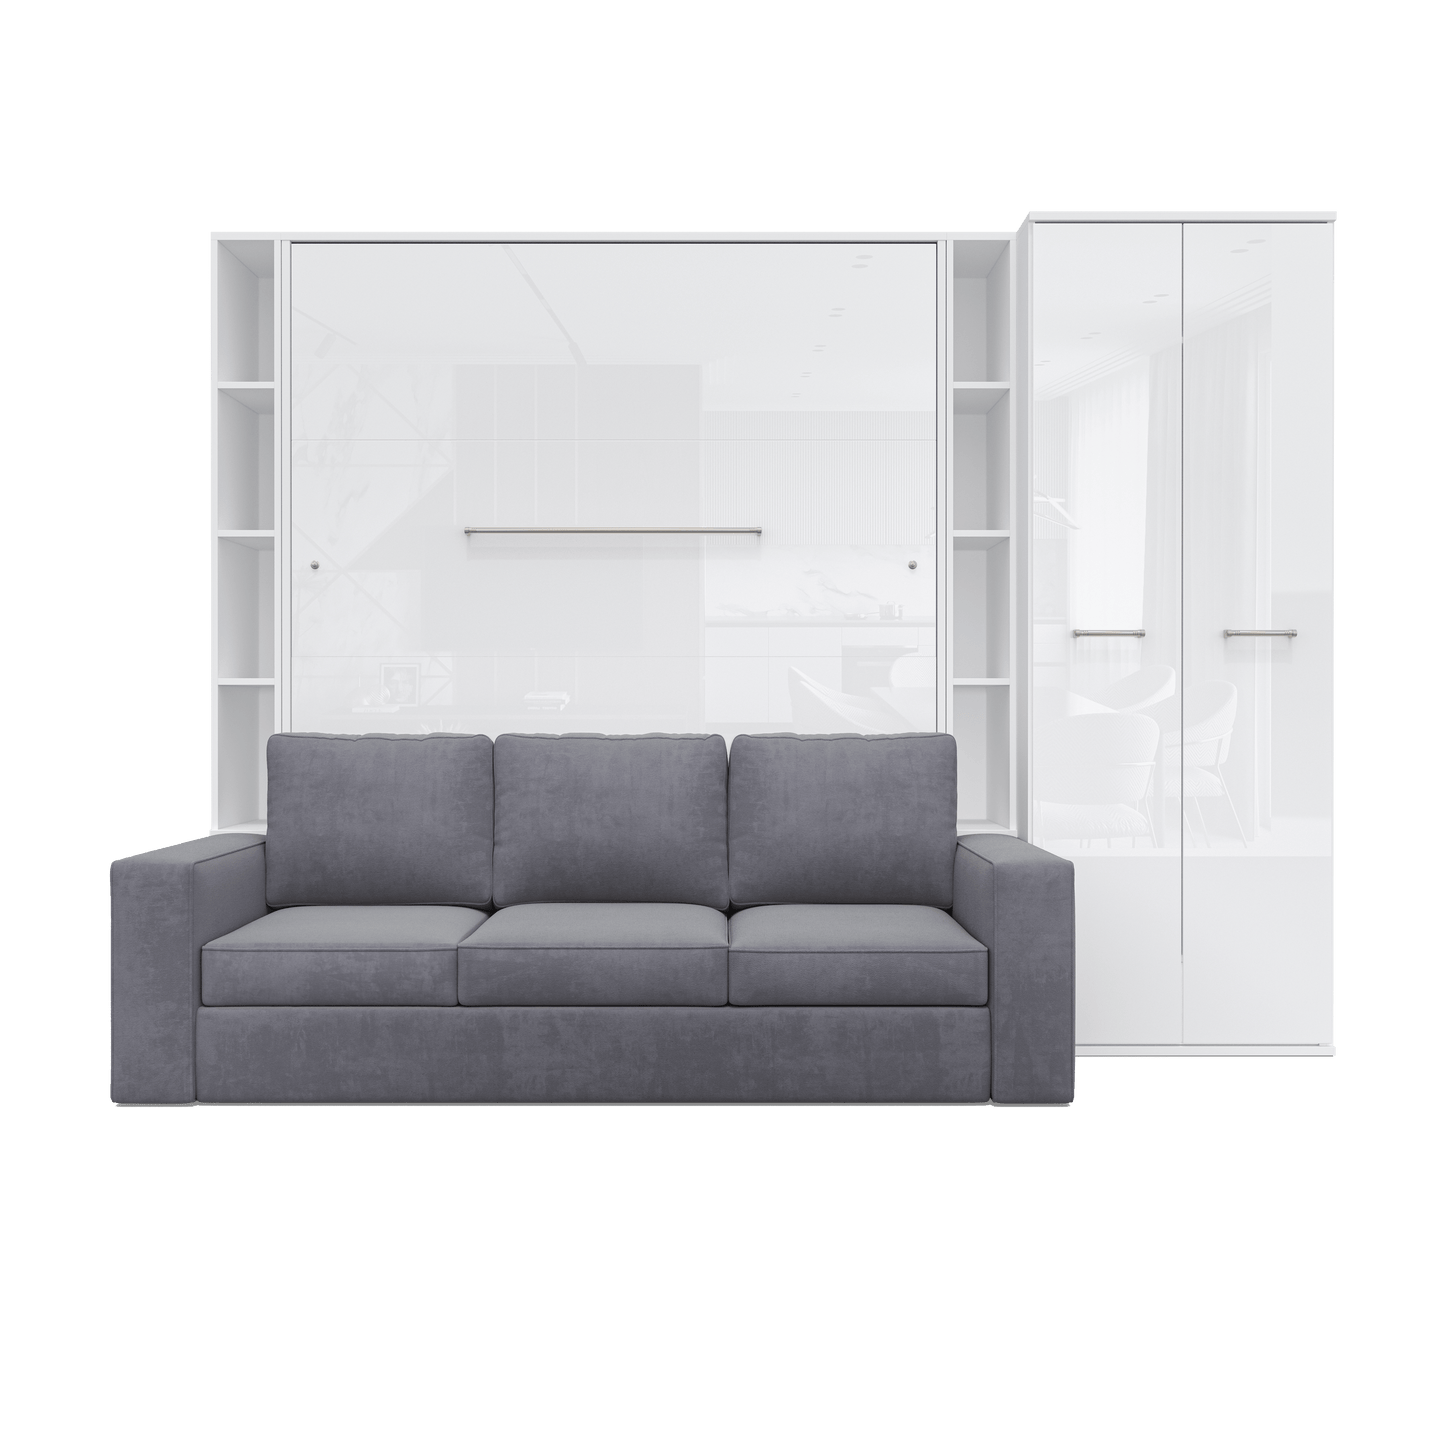 Maxima House Maxima House Vertical Queen size Murphy Bed Invento with a Sofa, two Cabinets and Wardrobe White/White + Grey IN014/23/24W-G